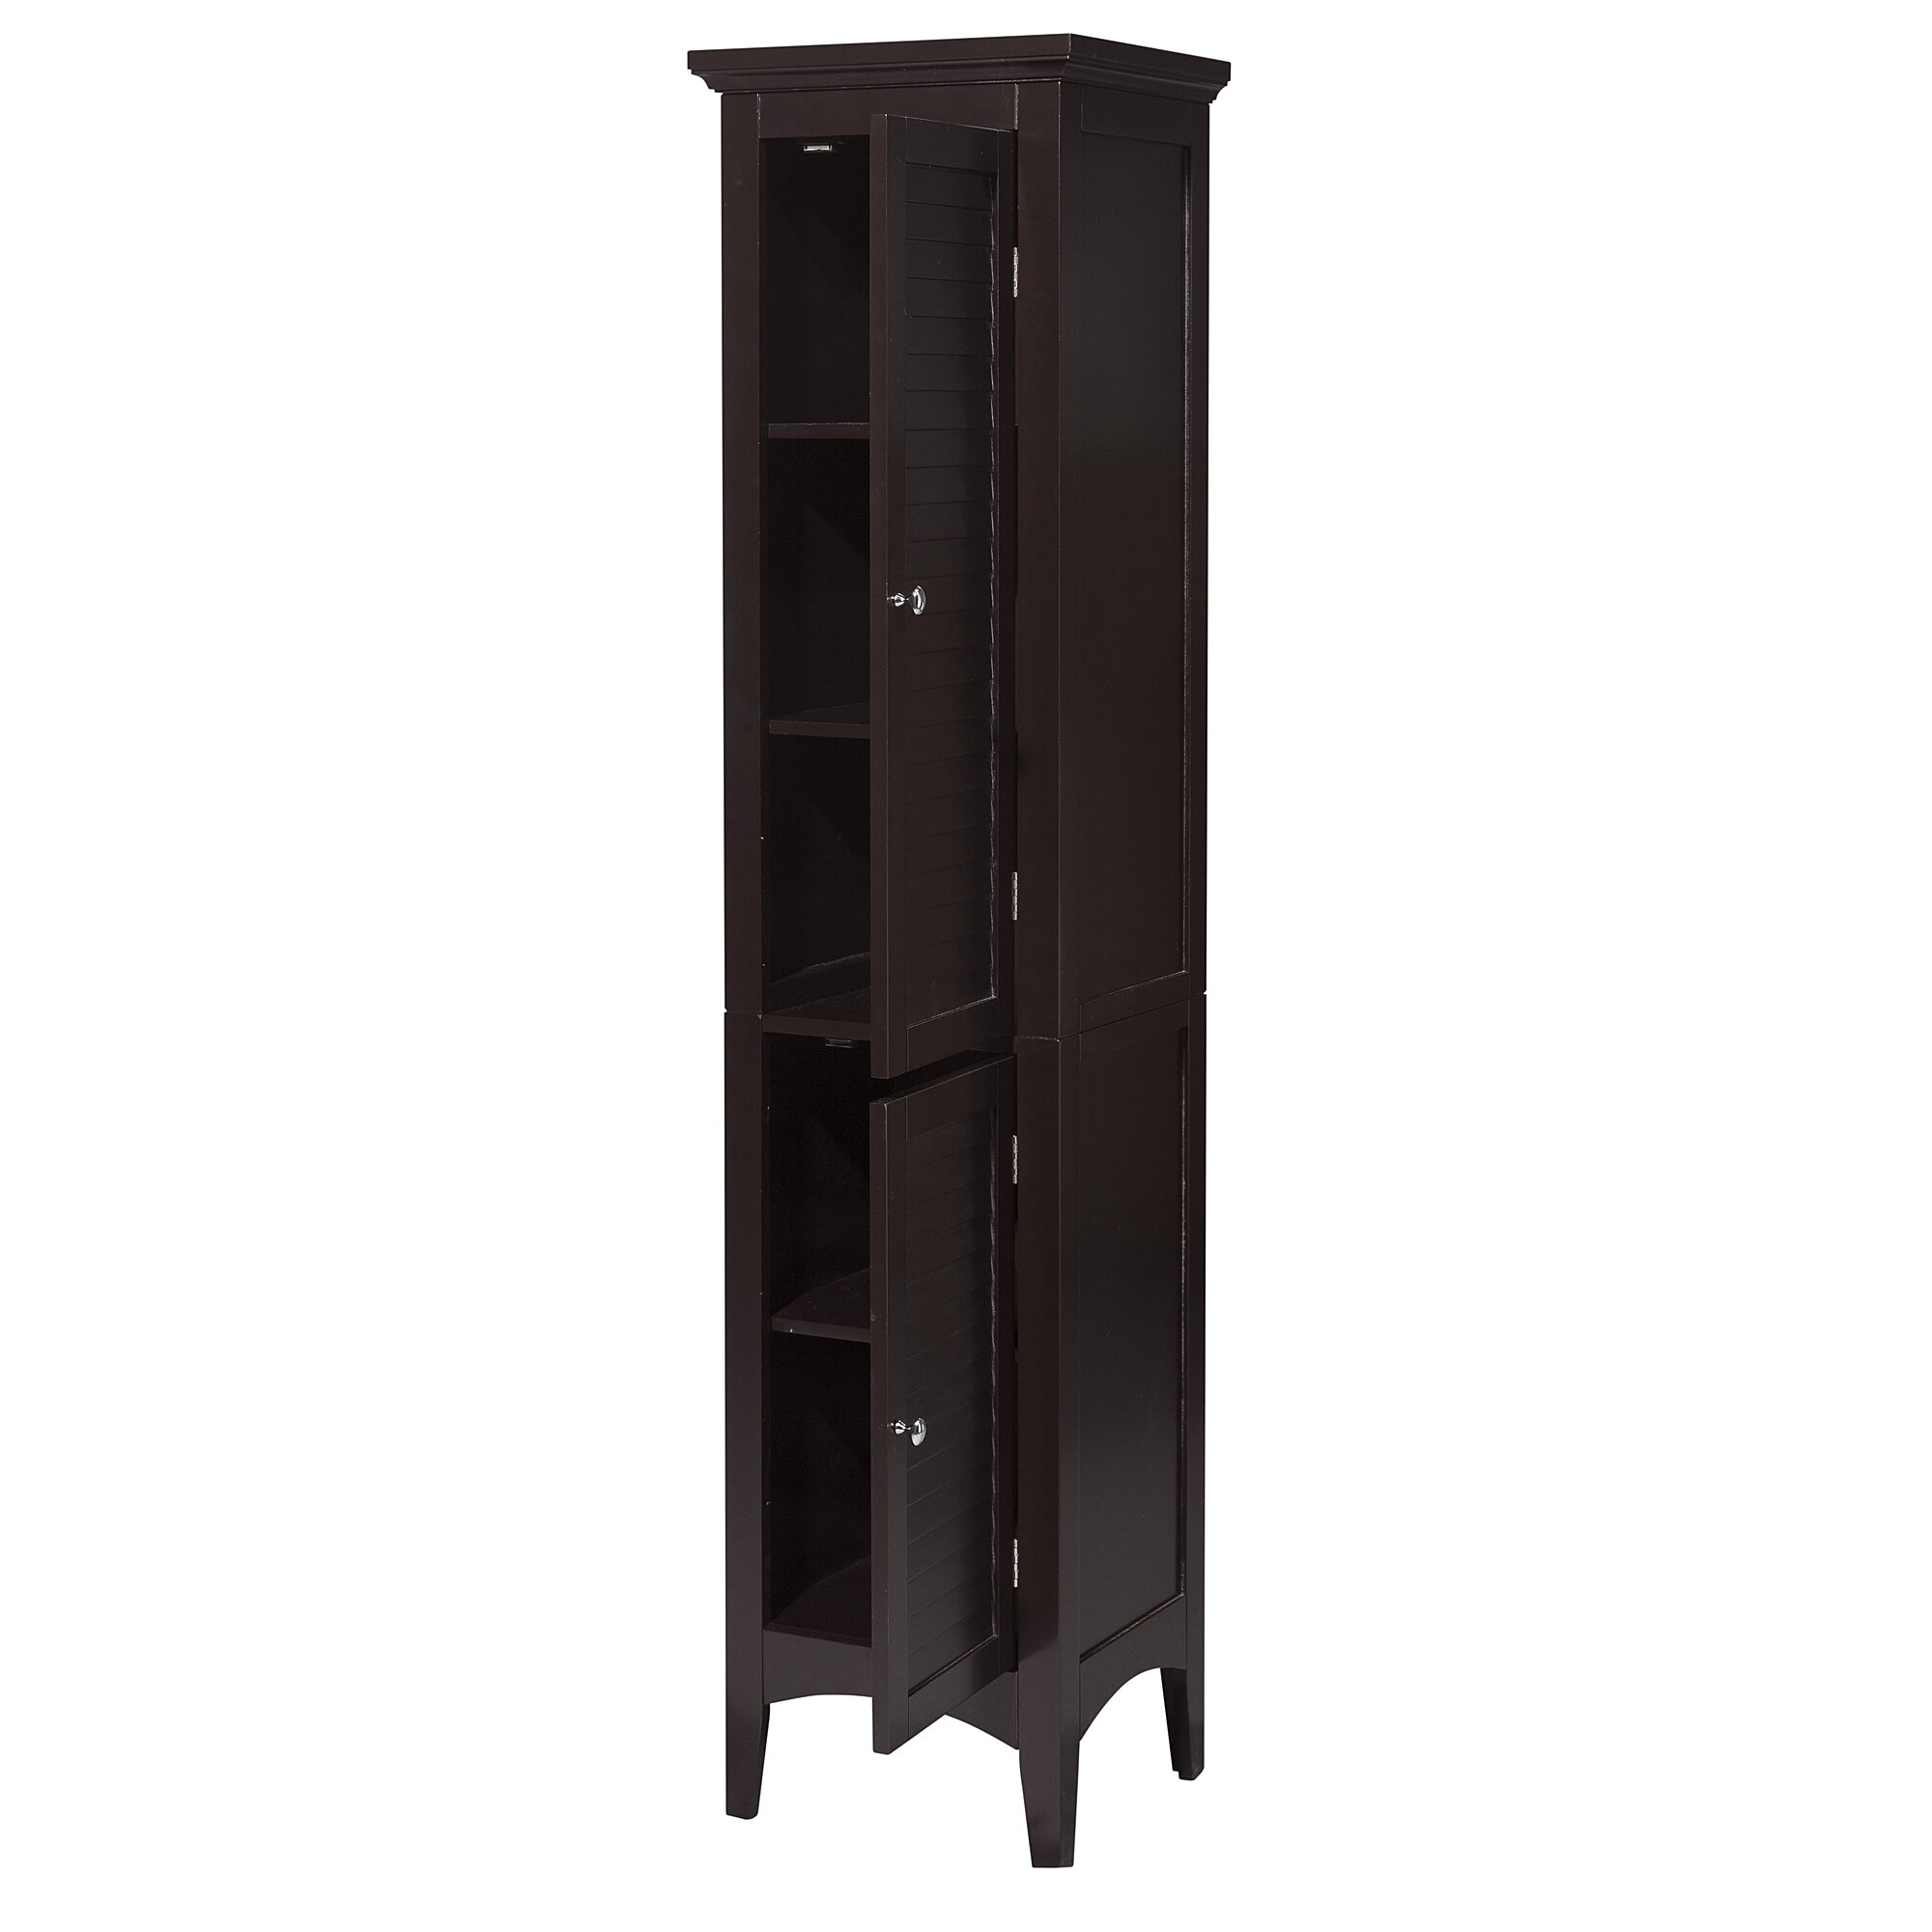 Linen Cabinets & Towers You'll Love | Wayfair - QUICK VIEW